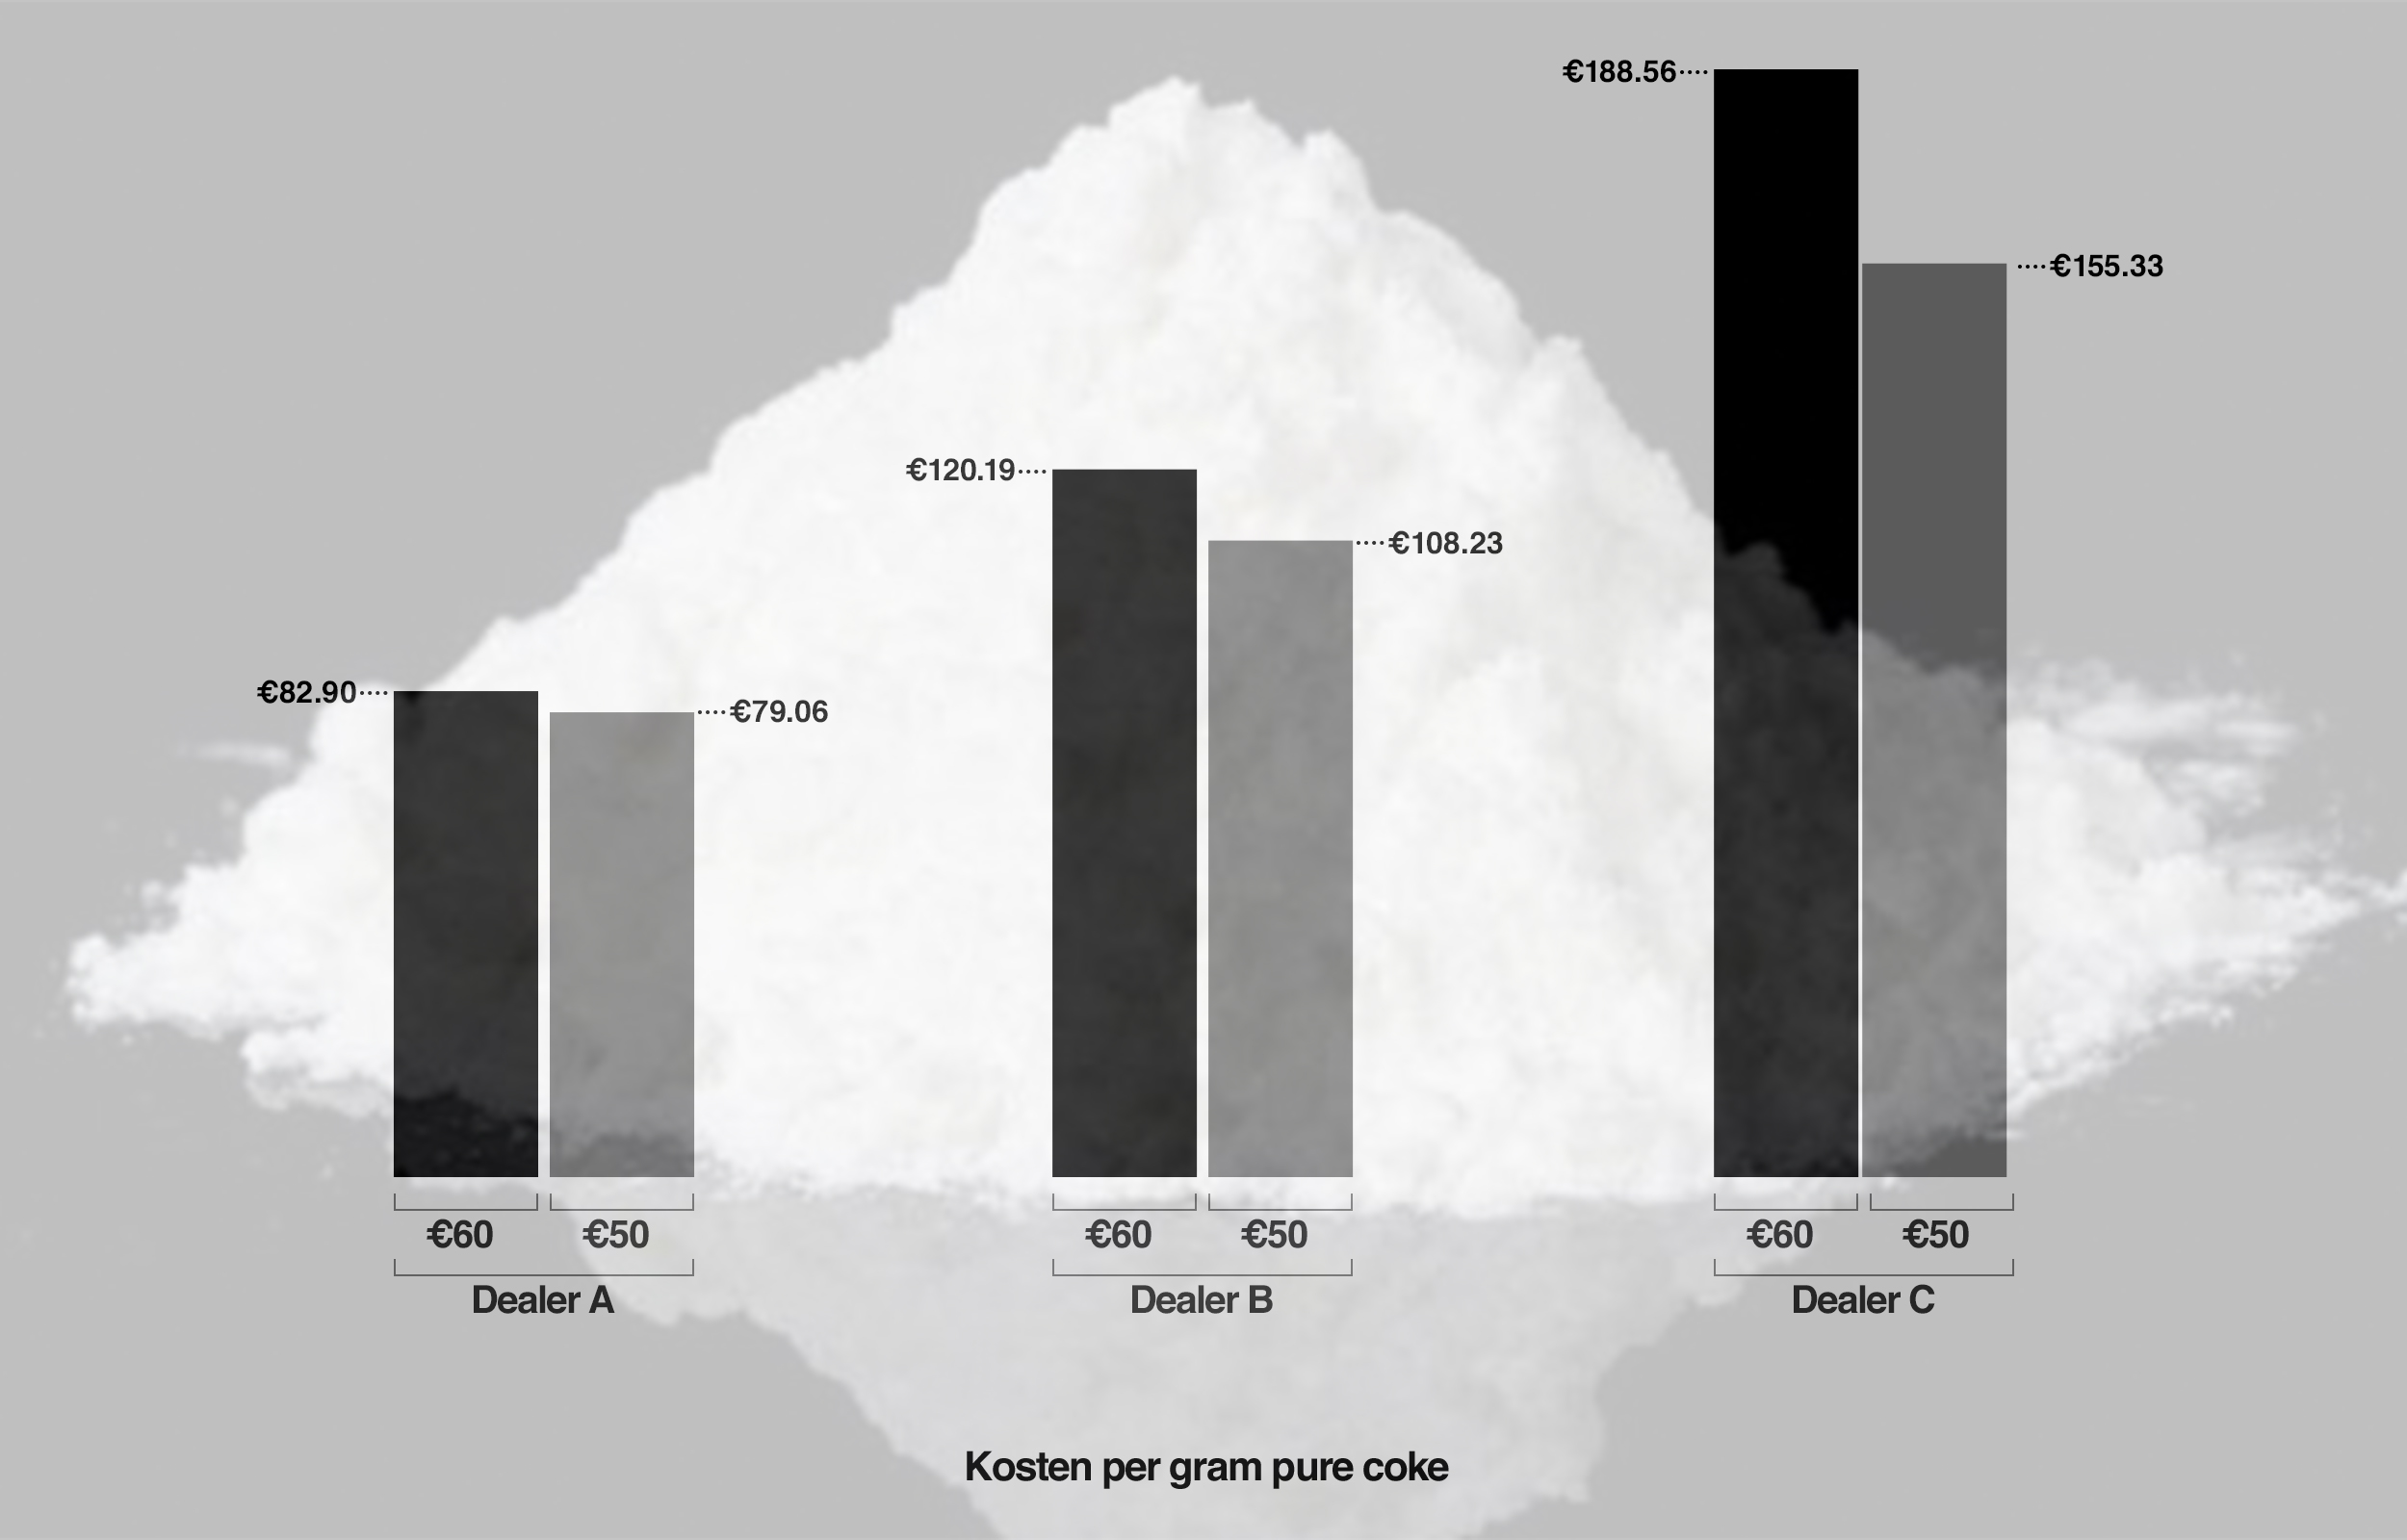 Is Expensive Cocaine Really Better? We Tested £50 and £60 Coke to See